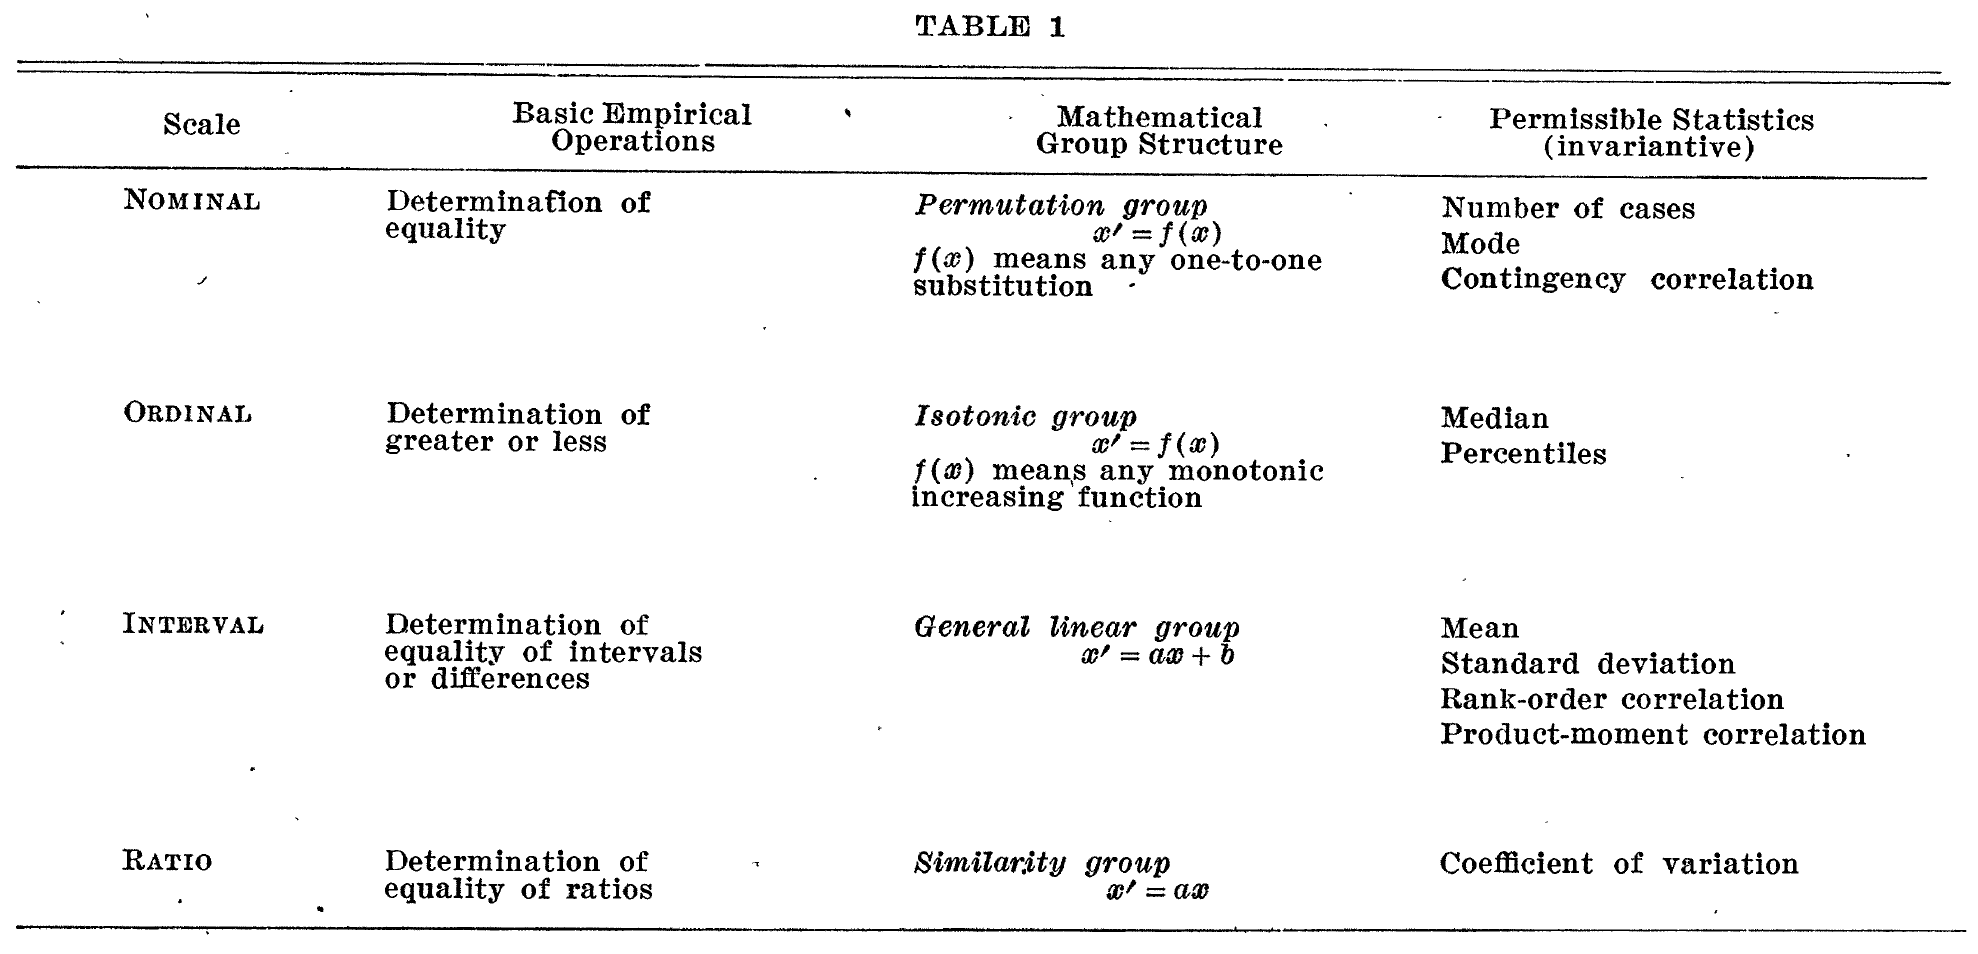 From S.S. Stevens, “On the Theory of Scales of Measurement (1946) Science. Volume 103, Number 2684.”